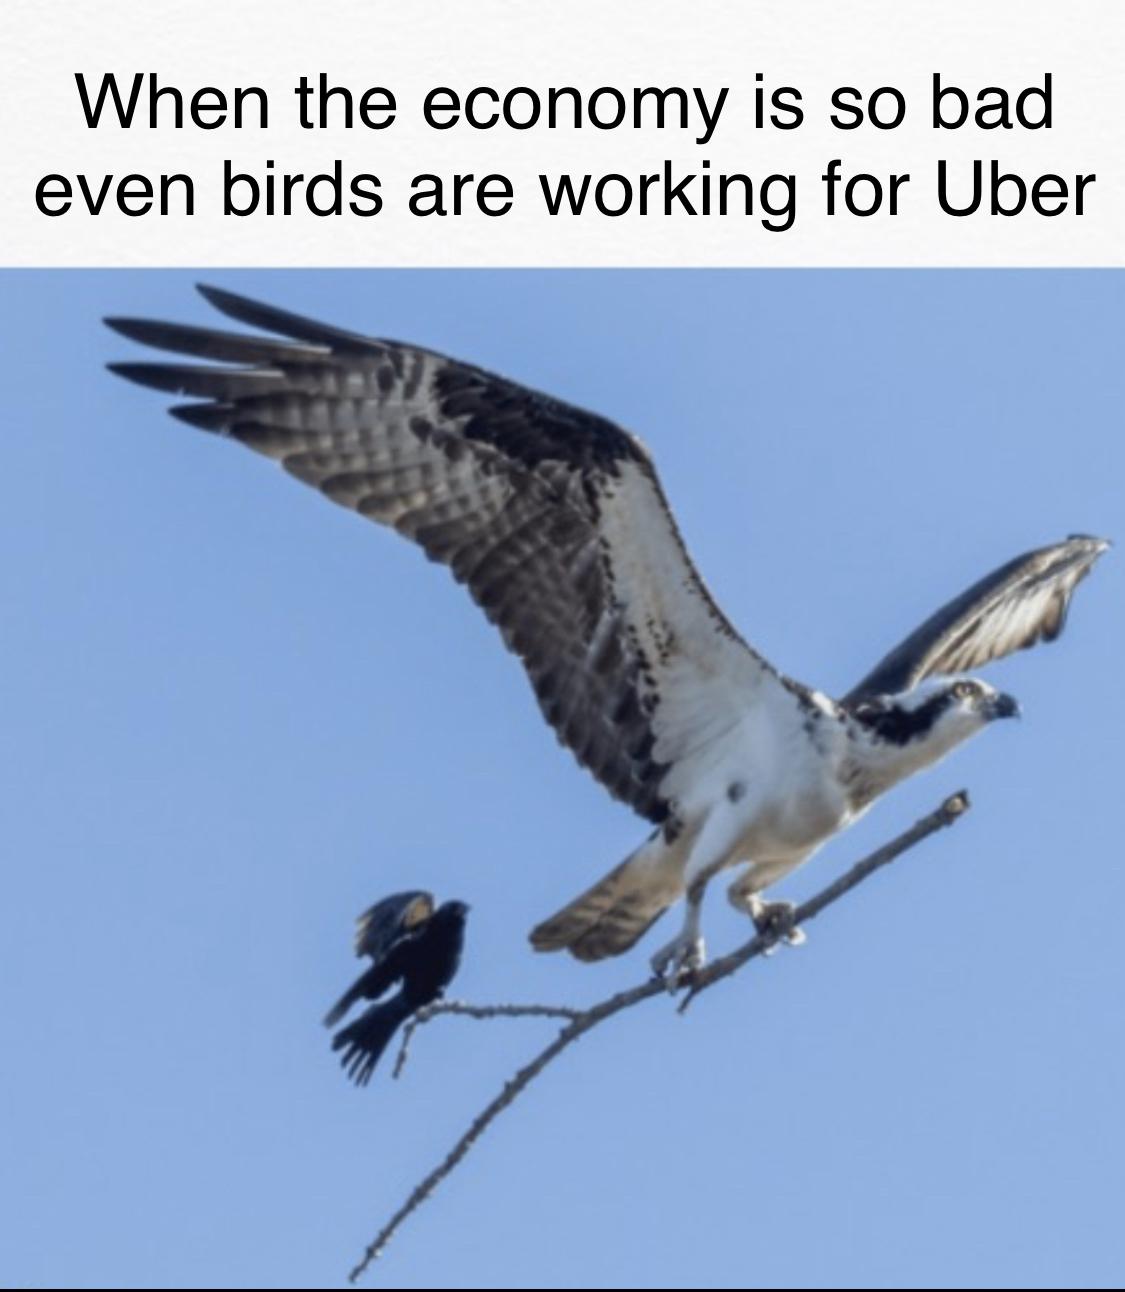 funny memes and pics - jocelyn anderson photography - When the economy is so bad even birds are working for Uber